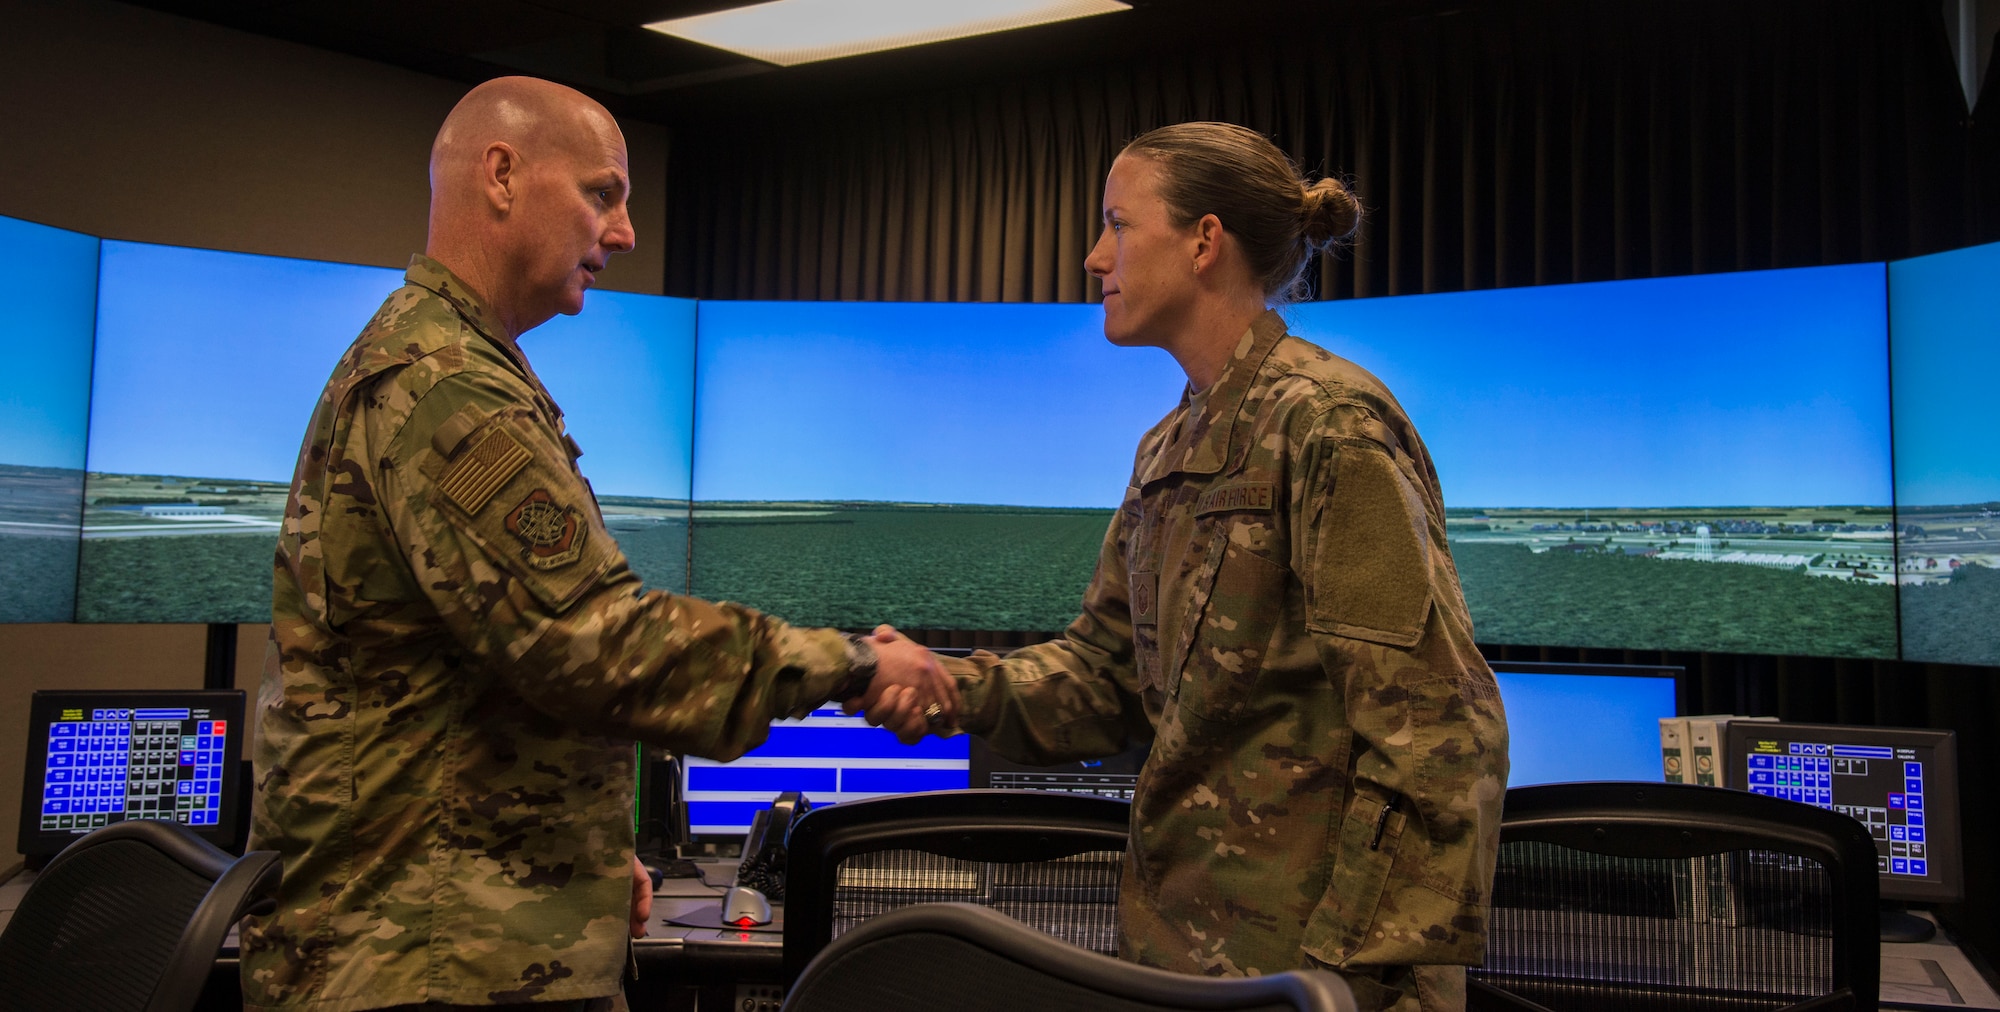 Maj. Gen. Sam Barrett, 18th Air Force commander, coins Master Sgt. Patricia Tate, 375th Operations Support Squadron air traffic controller, Oct.11, 2018, at Scott Air Force Base, Illinois. Tate was coined for being an exceptional performer within the squadron. (U.S. Air Force photo by Airman 1st Class Nathaniel Hudson)